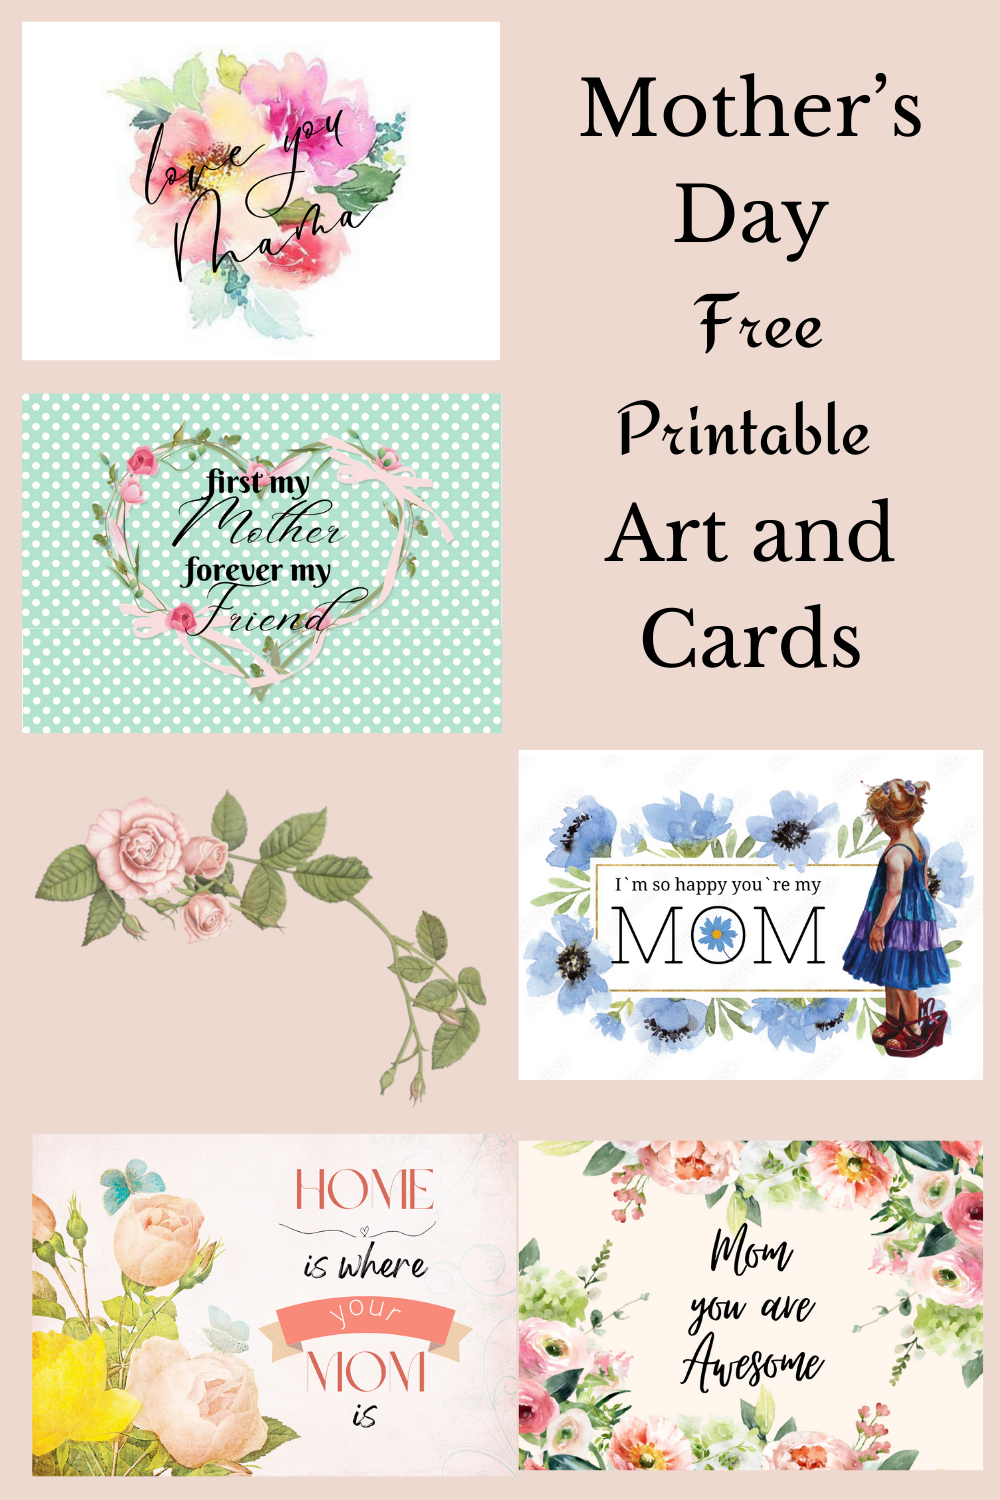 Mother’s Day Free Printable